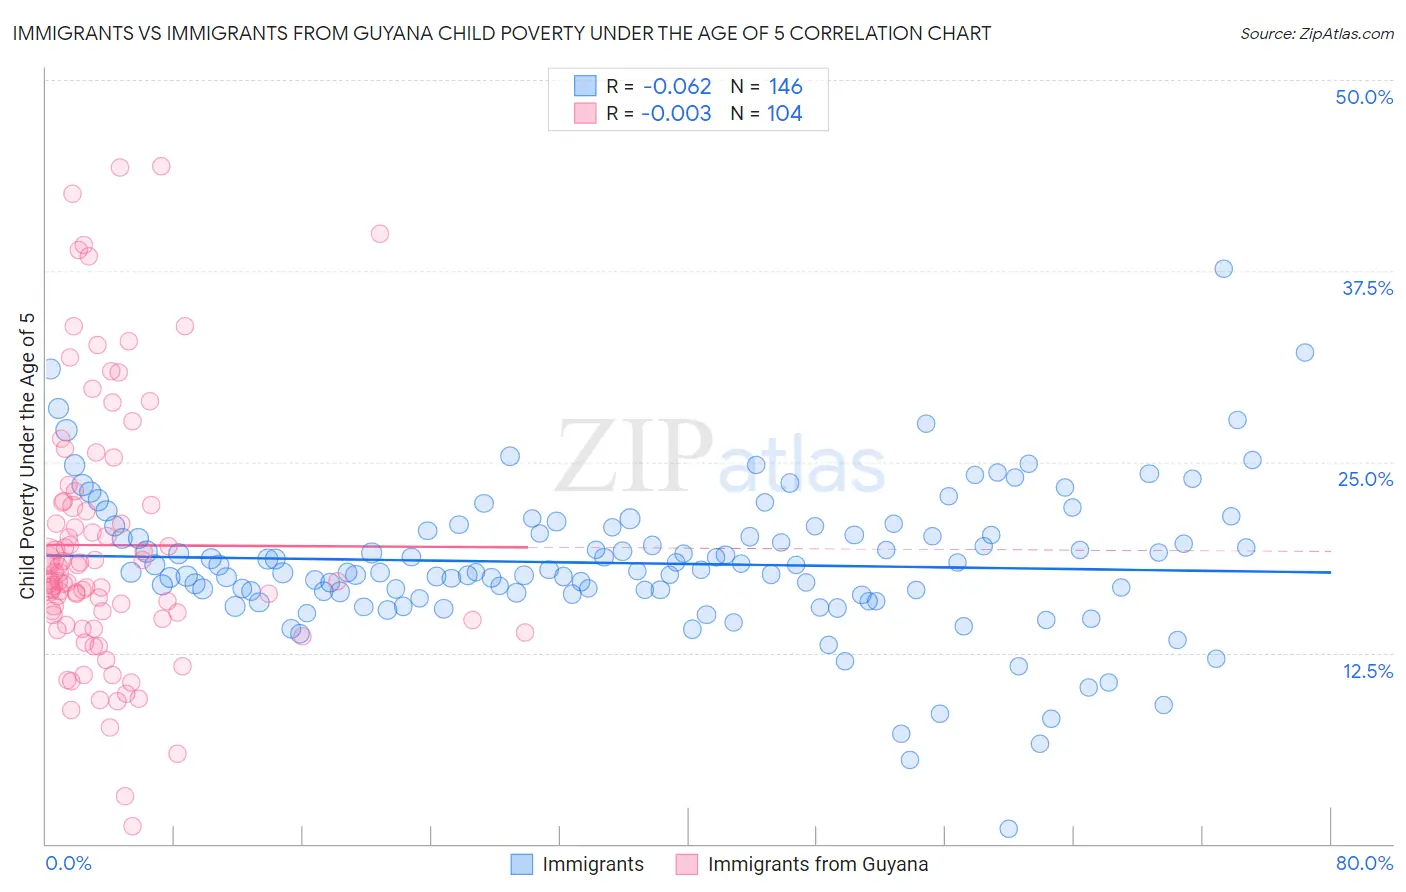 Immigrants vs Immigrants from Guyana Child Poverty Under the Age of 5